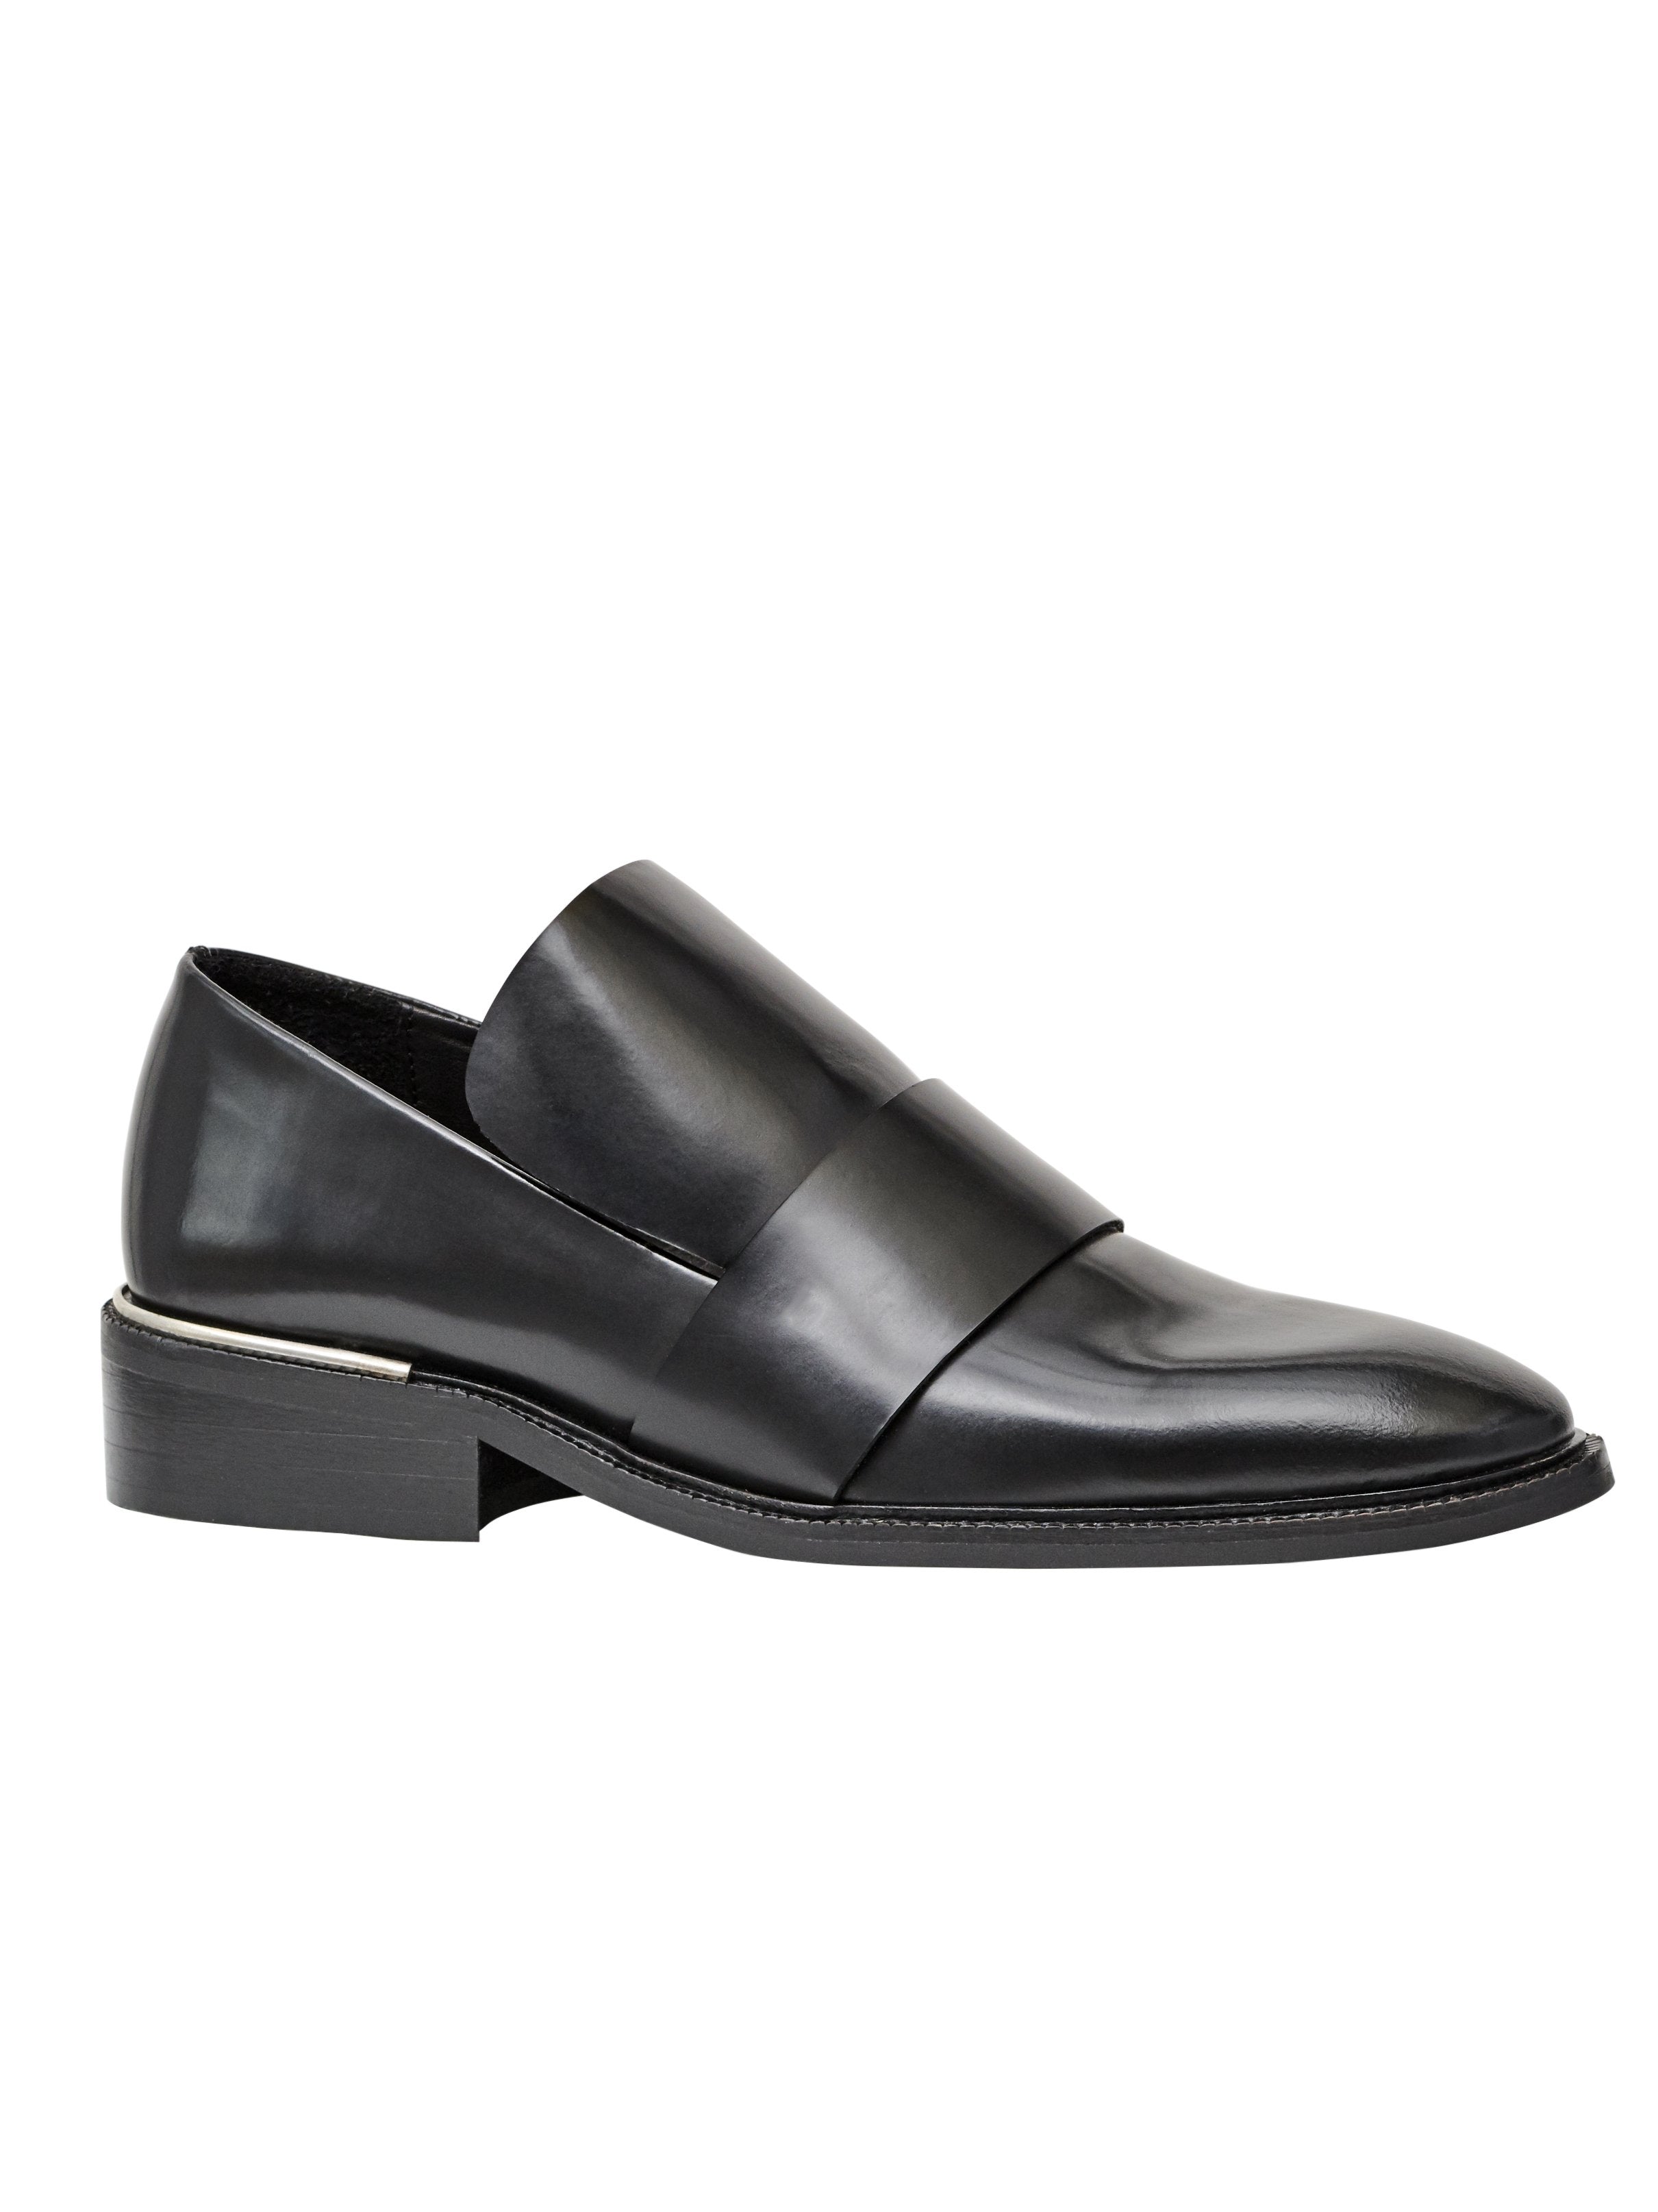 The Luxe Loafer in Black